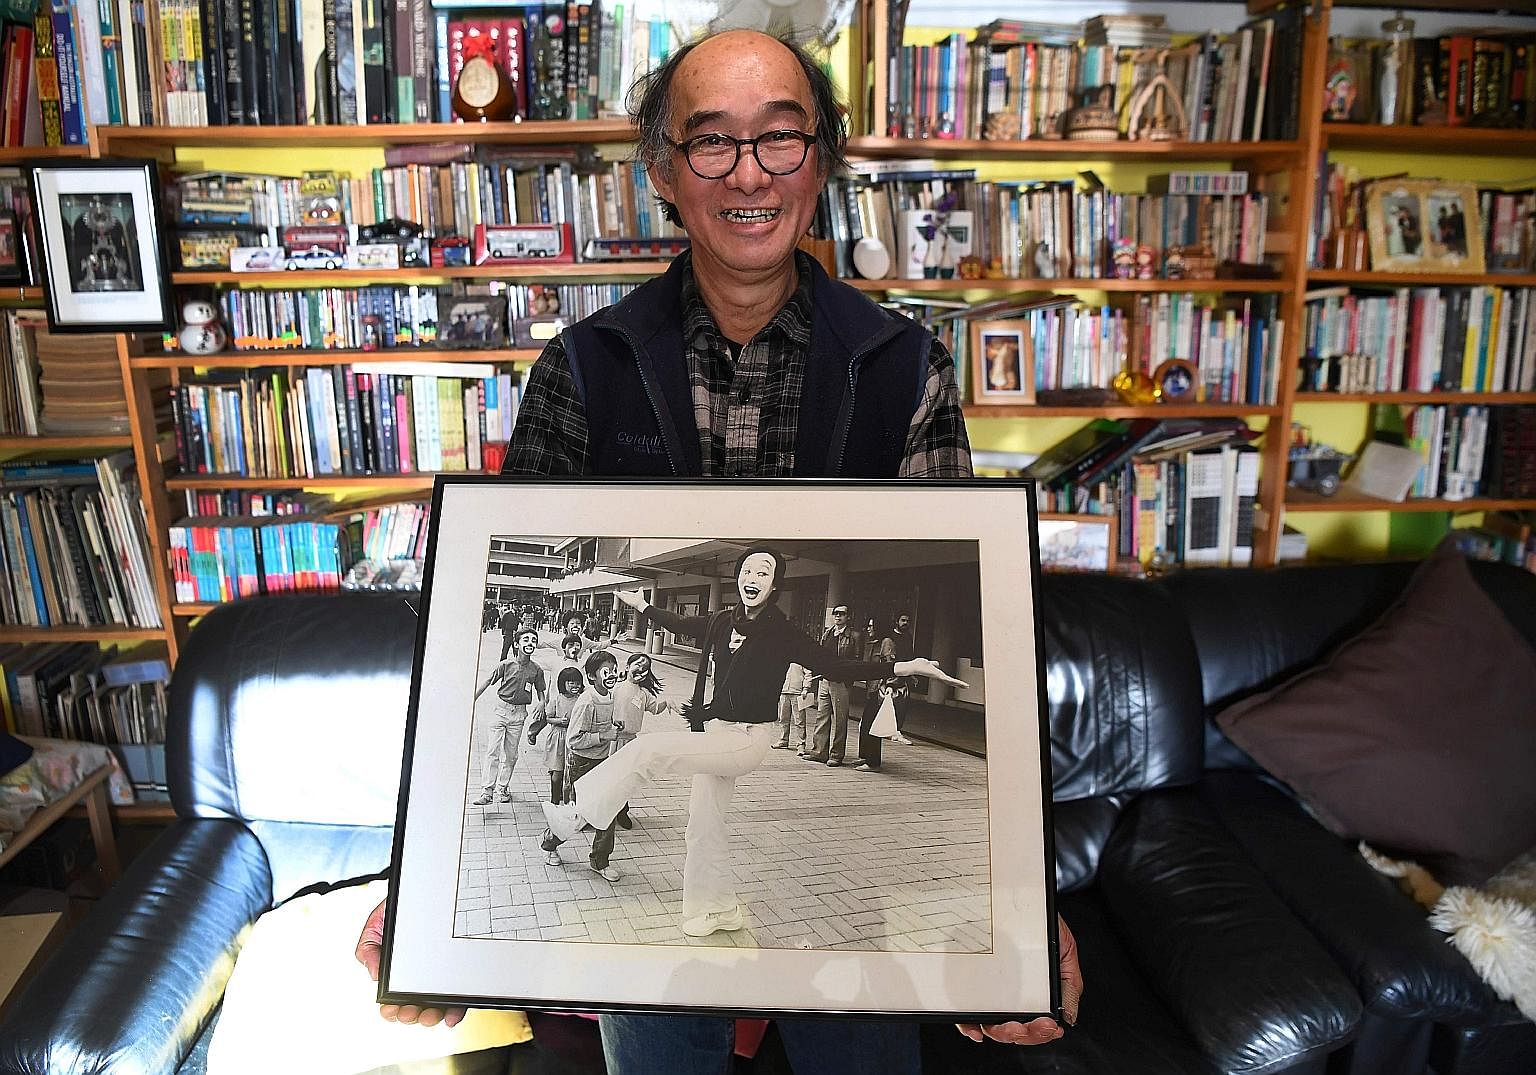 Mr Philip Fok with a photo of himself in his younger days as a mime artist in Hong Kong. He emigrated to Sydney in 1992. Hong Kong residents holding up placards with words depicting their feelings about the city as the 20th anniversary of its handove